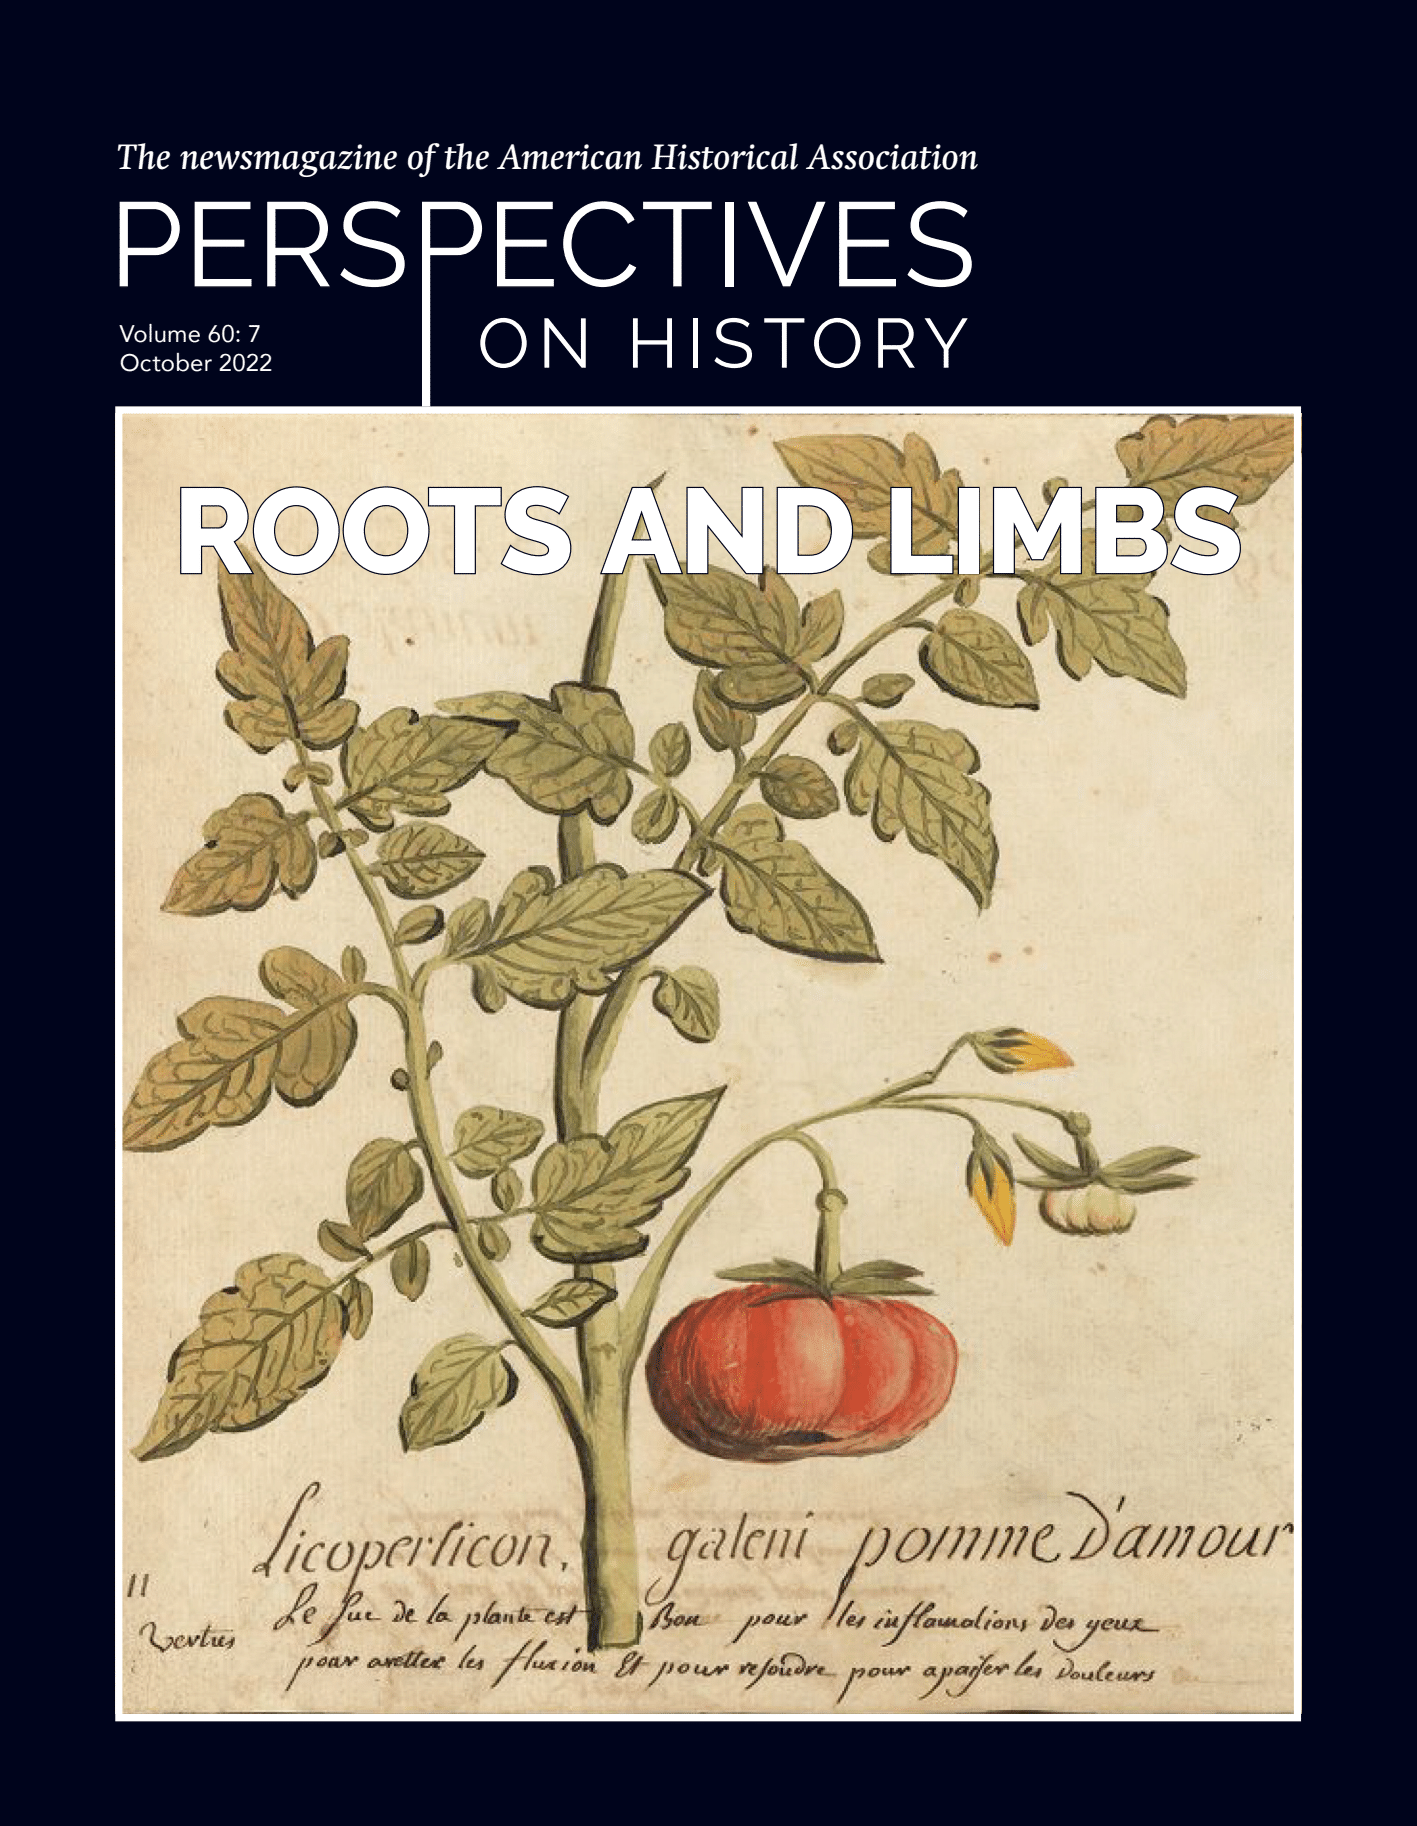 Perspectives on History October 2022 Cover. A colored sketch of a tomato plant on linen paper. The text reads: “LICOPERSICON GALENI POMME D’AMOUR. Le suc de la plante est bon por les inflamations des yeux pour aretter les fluxion et pour rejoudre pour apaiser les douleurs.” (Licopersicon galeni, Apple of Love. The sap of the plant is good for eye inflammation, stopping swelling, and alleviating illness.)
